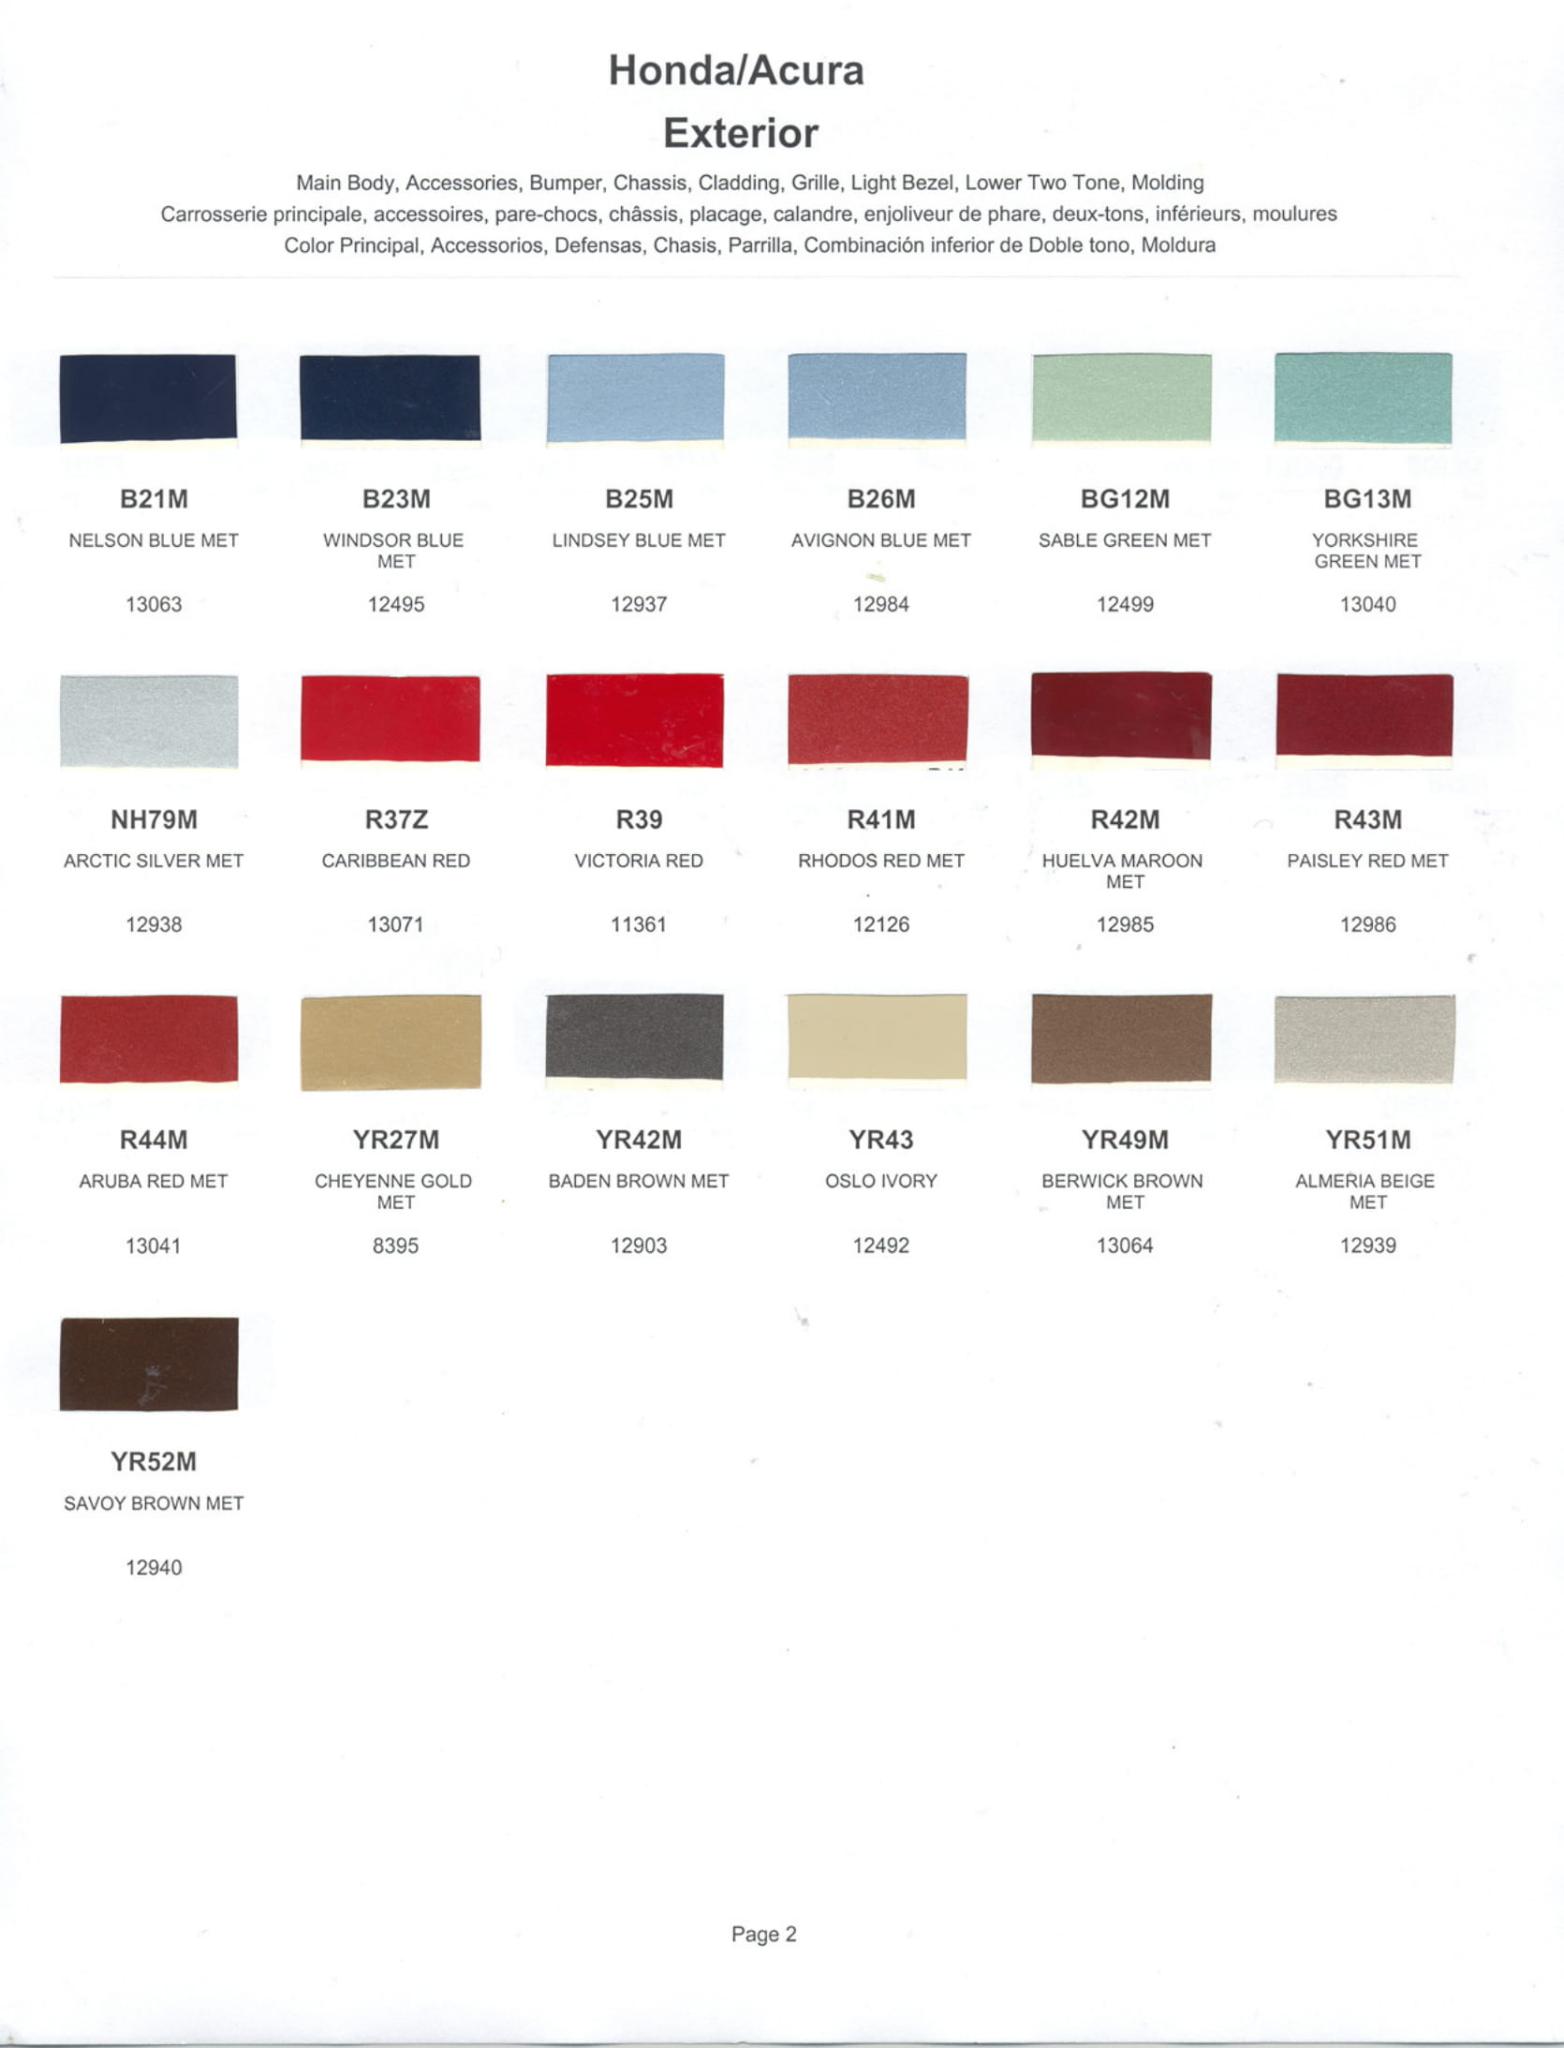 Paint Codes and color chart examples